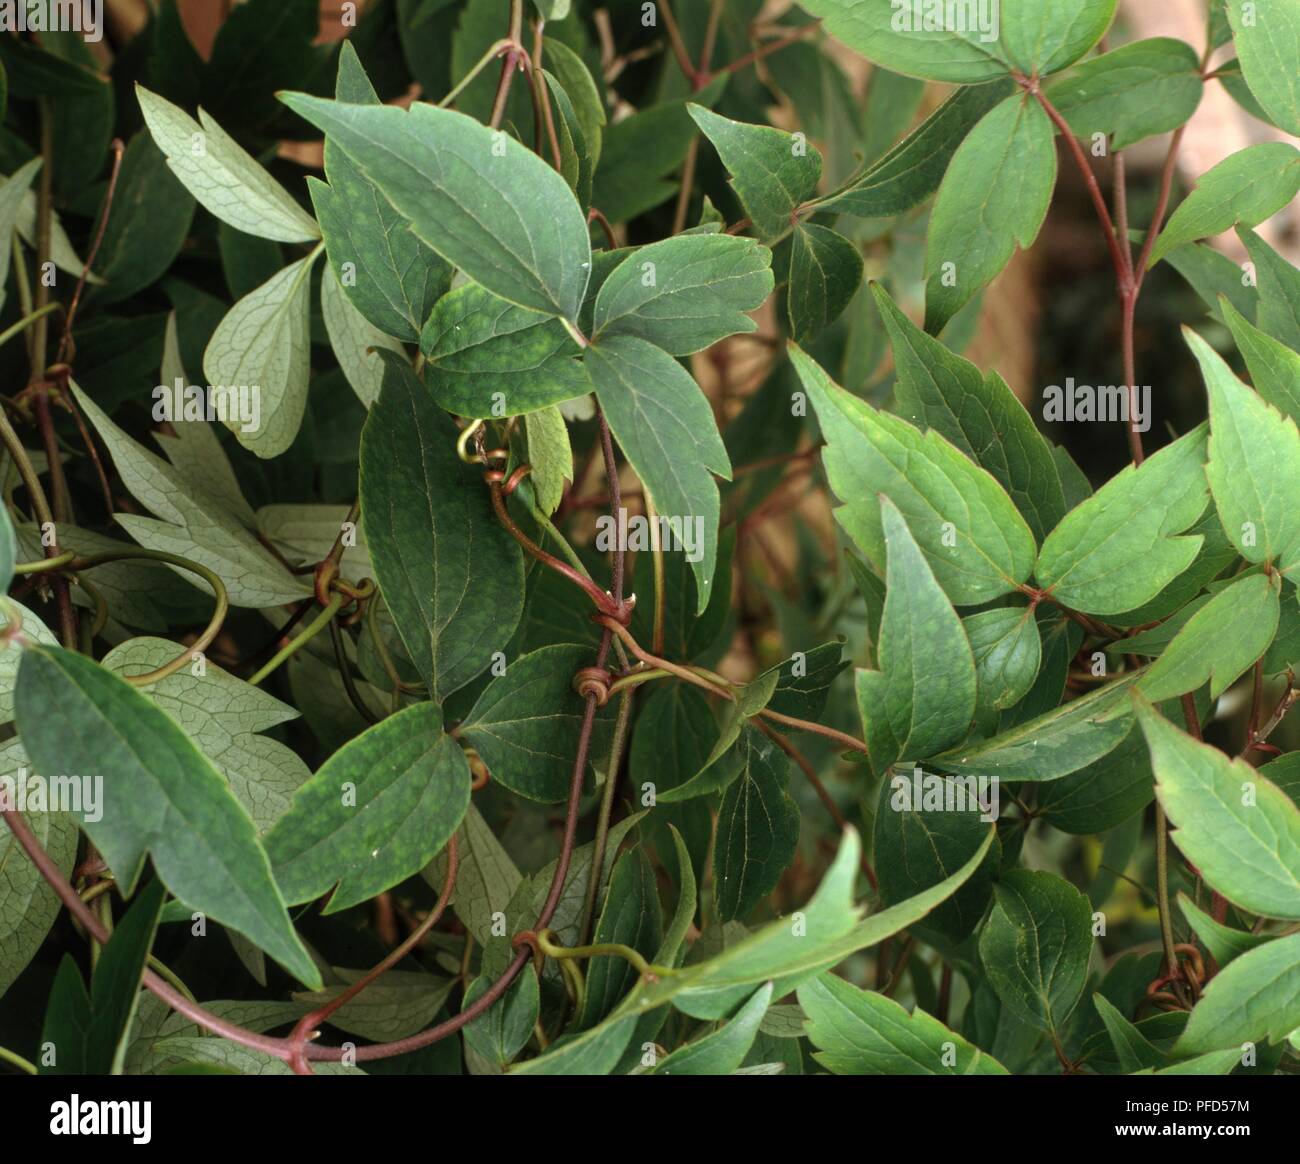 Clematis leaf stalks attached to stem Stock Photo